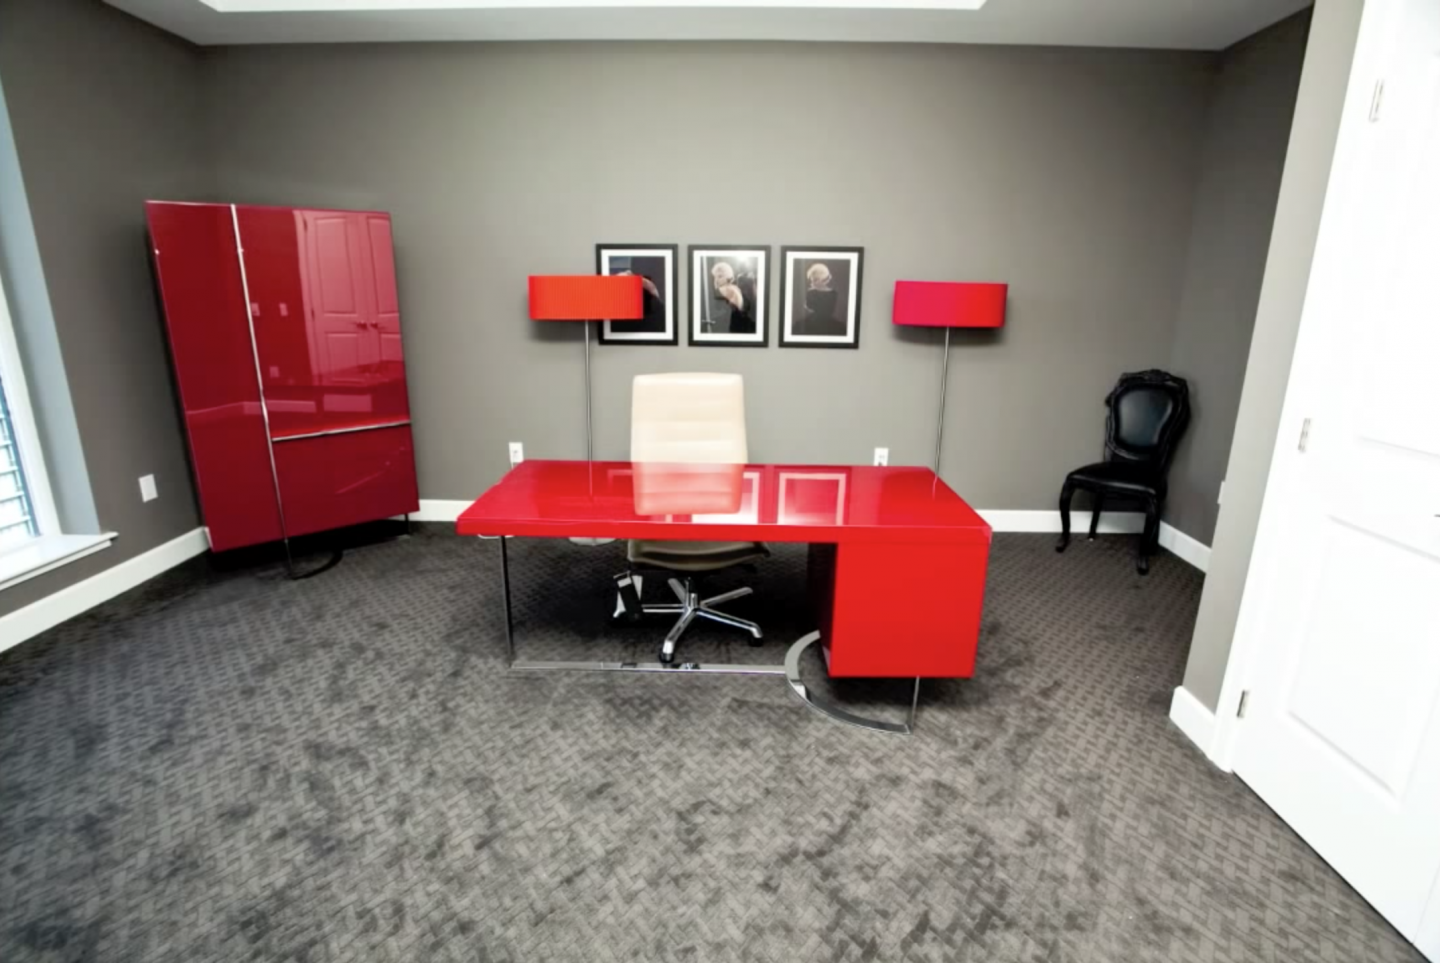 This red office does not count as a red room of pain, as depicted in E.L. James' Fifty Shades of Grey novel.